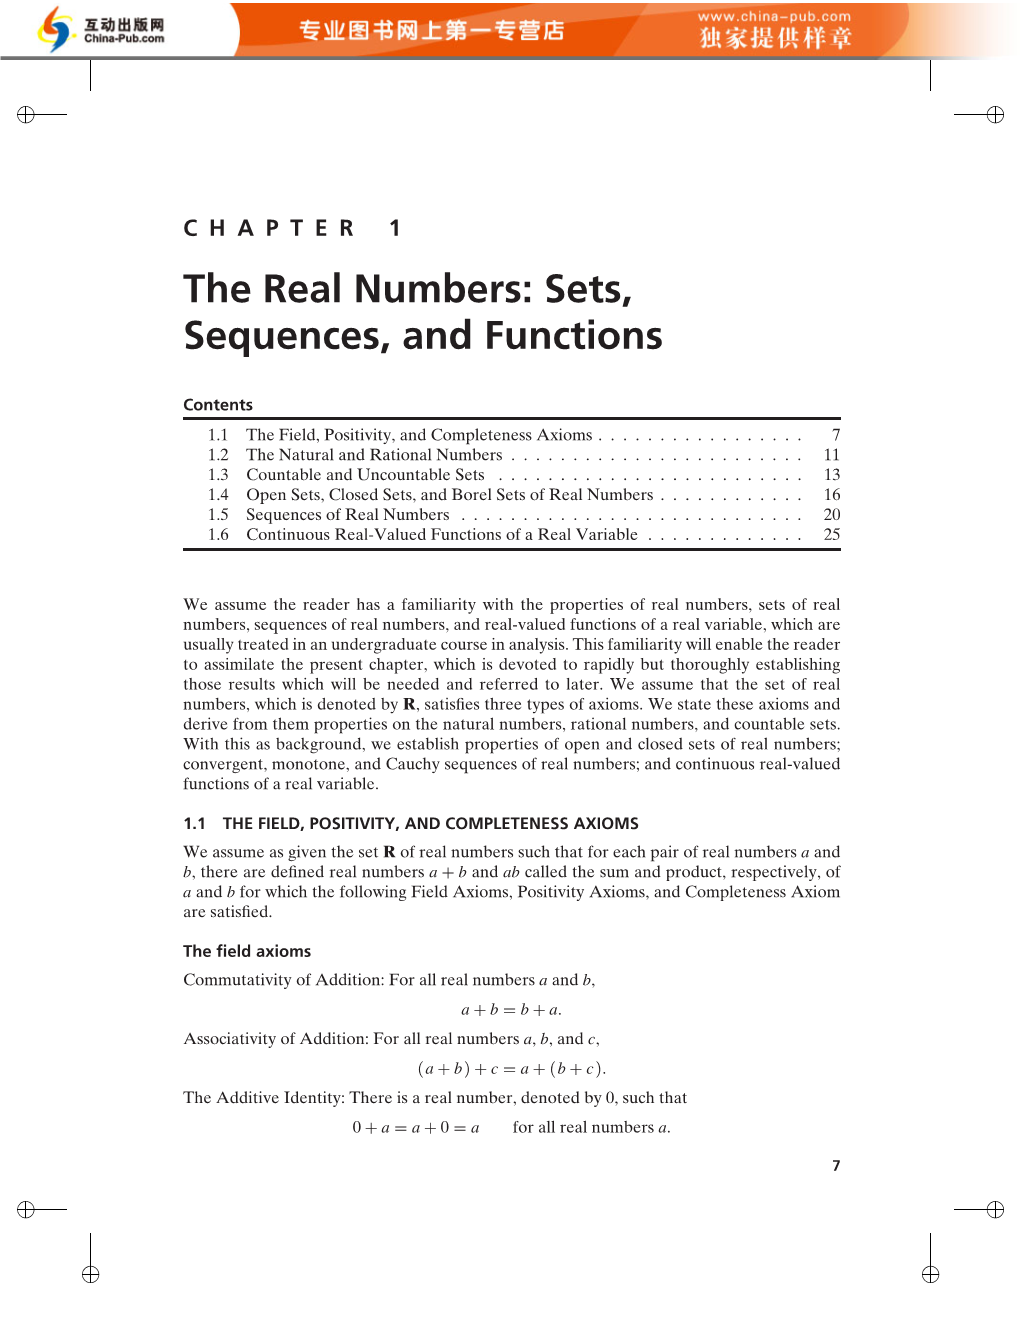 The Real Numbers: Sets, Sequences, and Functions